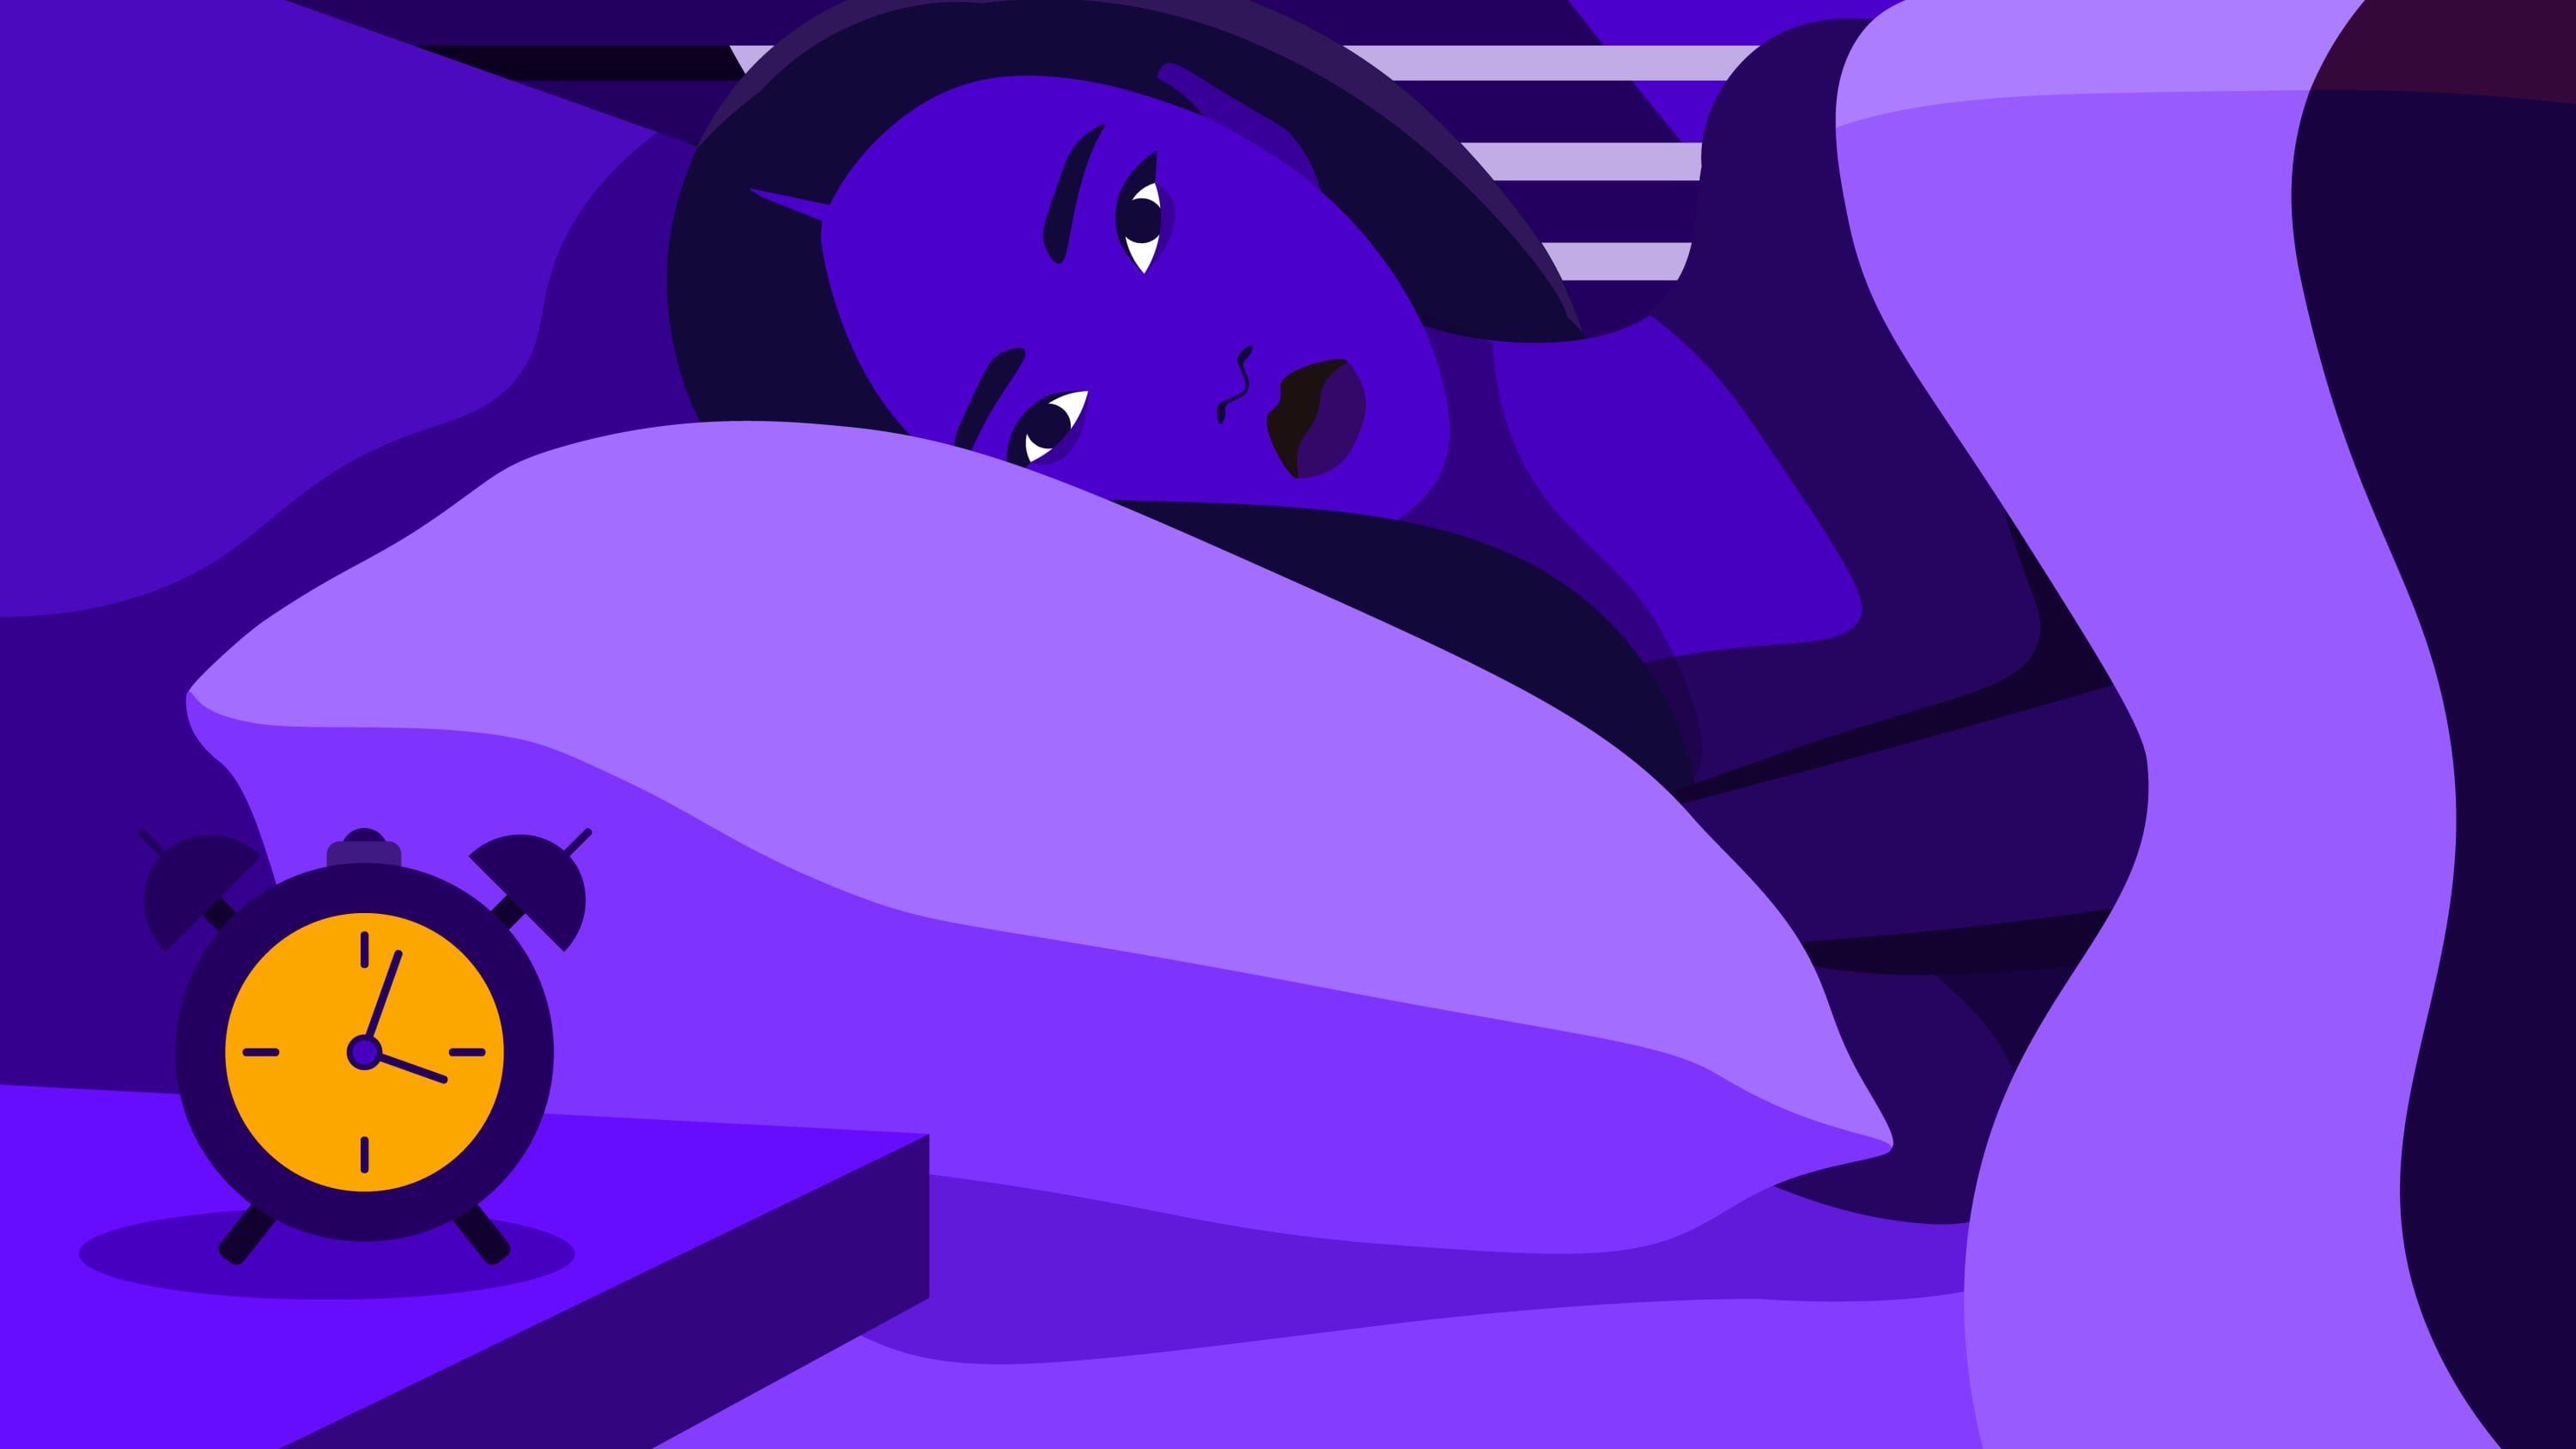 illustration of someone having difficulty sleeping, possibly because of COVID-19 dreams